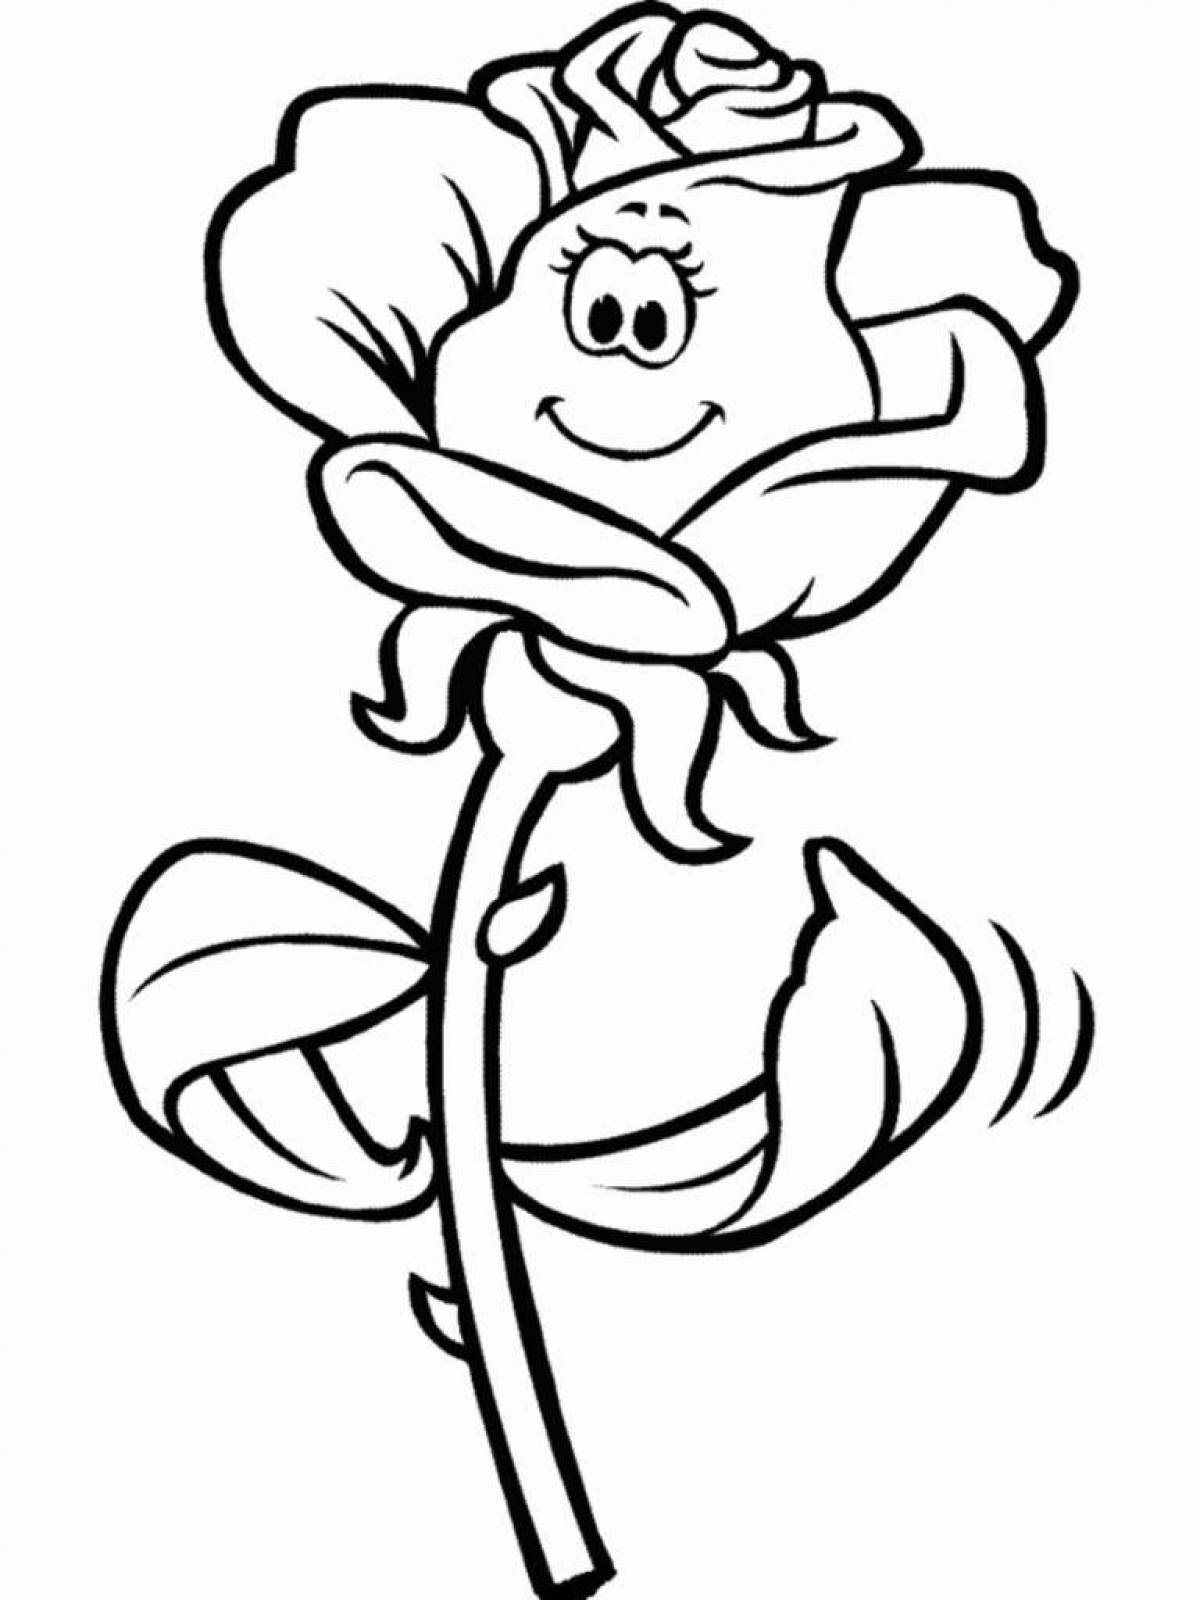 Fancy rose coloring page